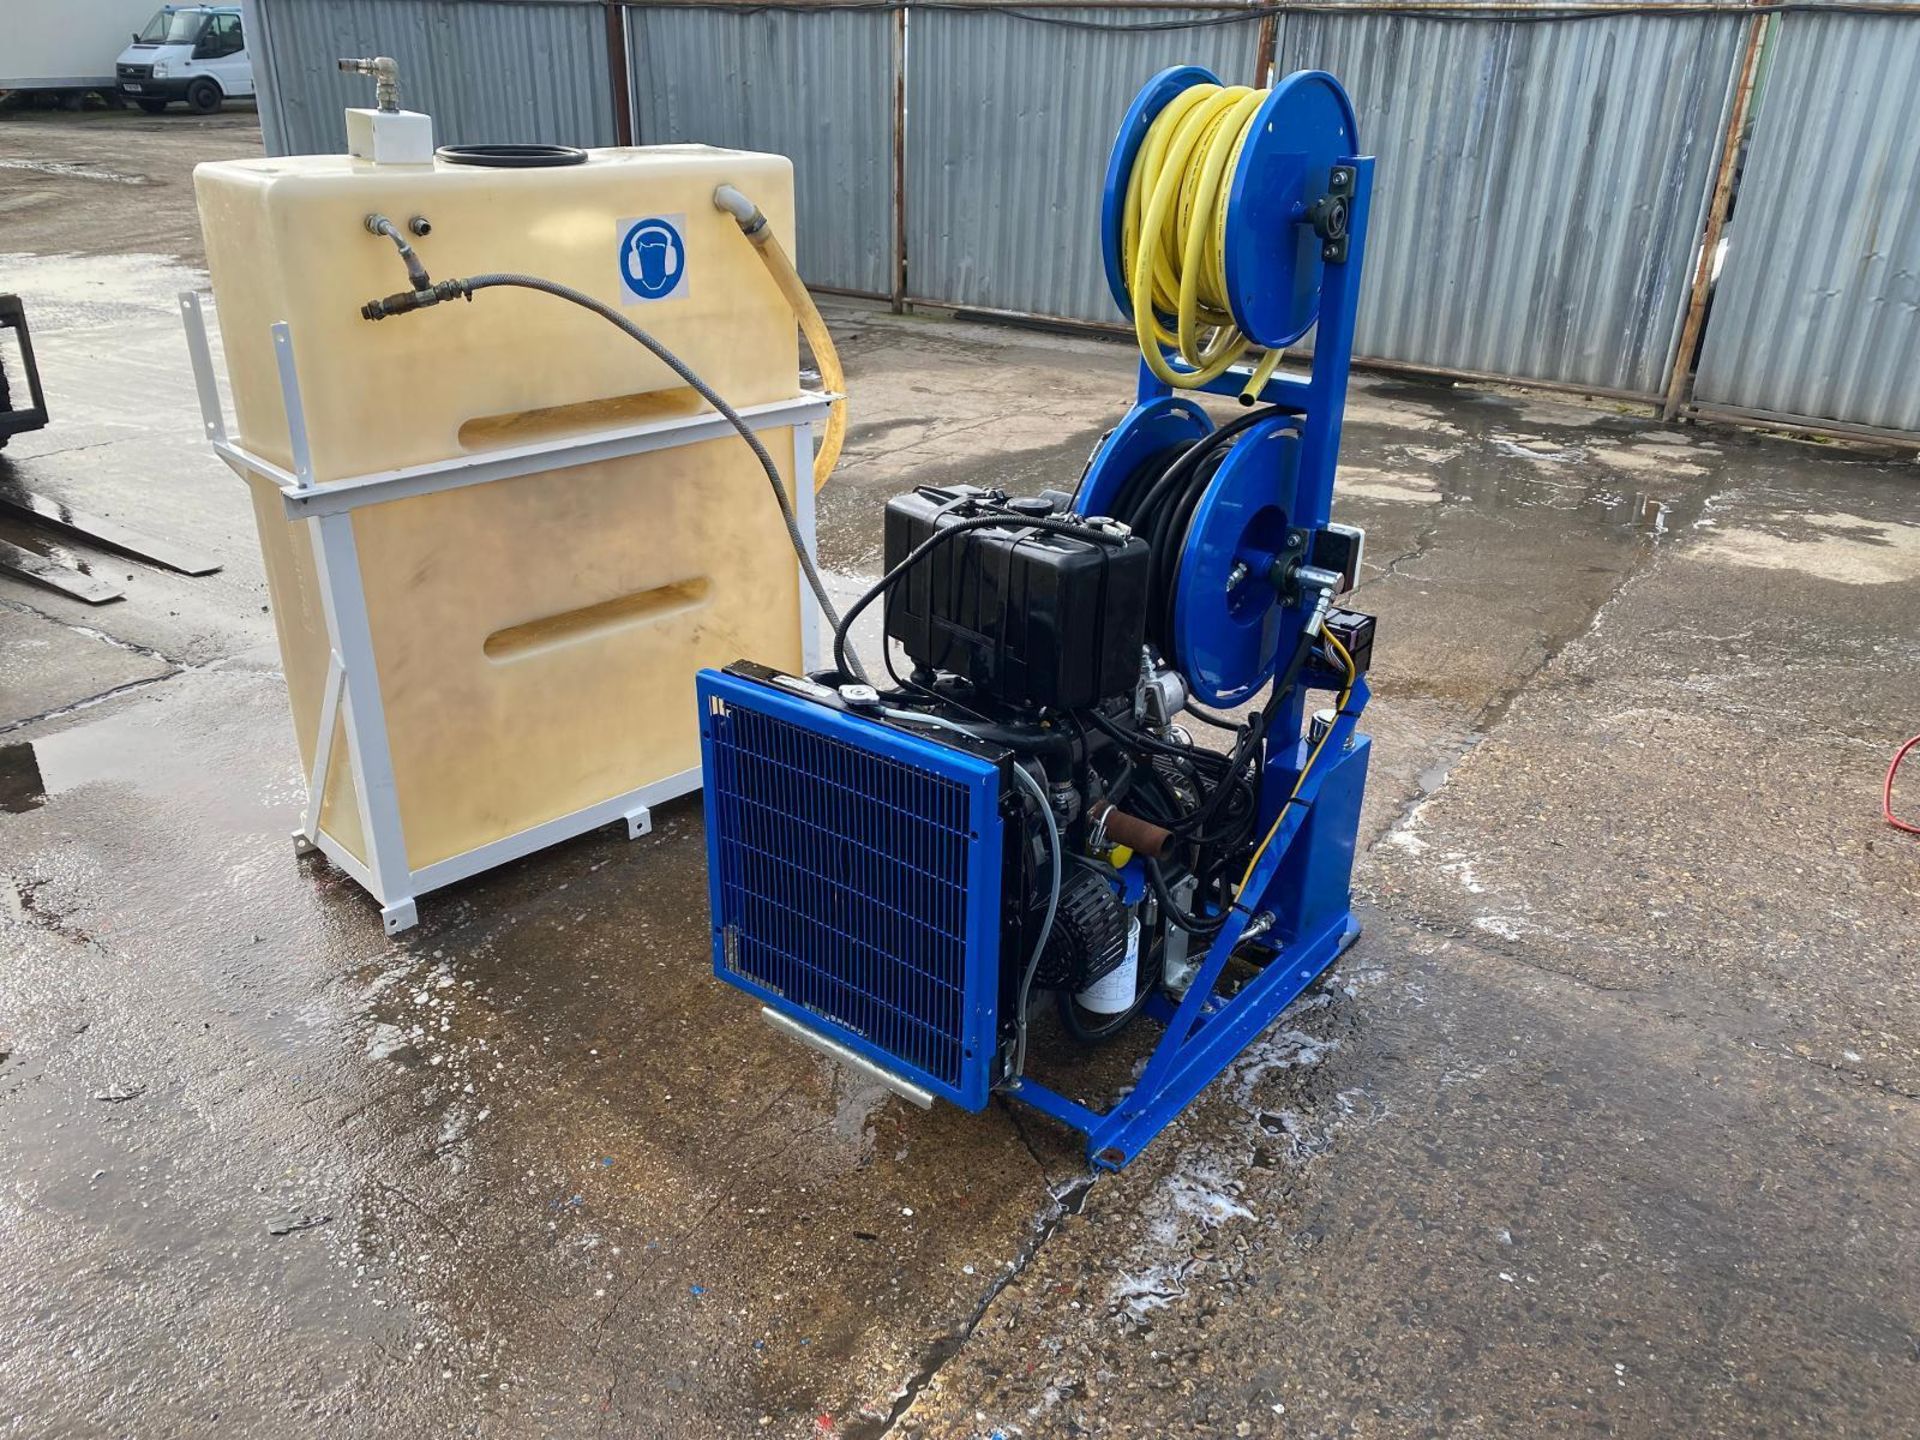 RIONED & ANDY GUEST KOHLER DIESEL HIGH-PRESSURE JETTER WITH WATER TANK (NO VAT ON HAMMER) - Image 7 of 9